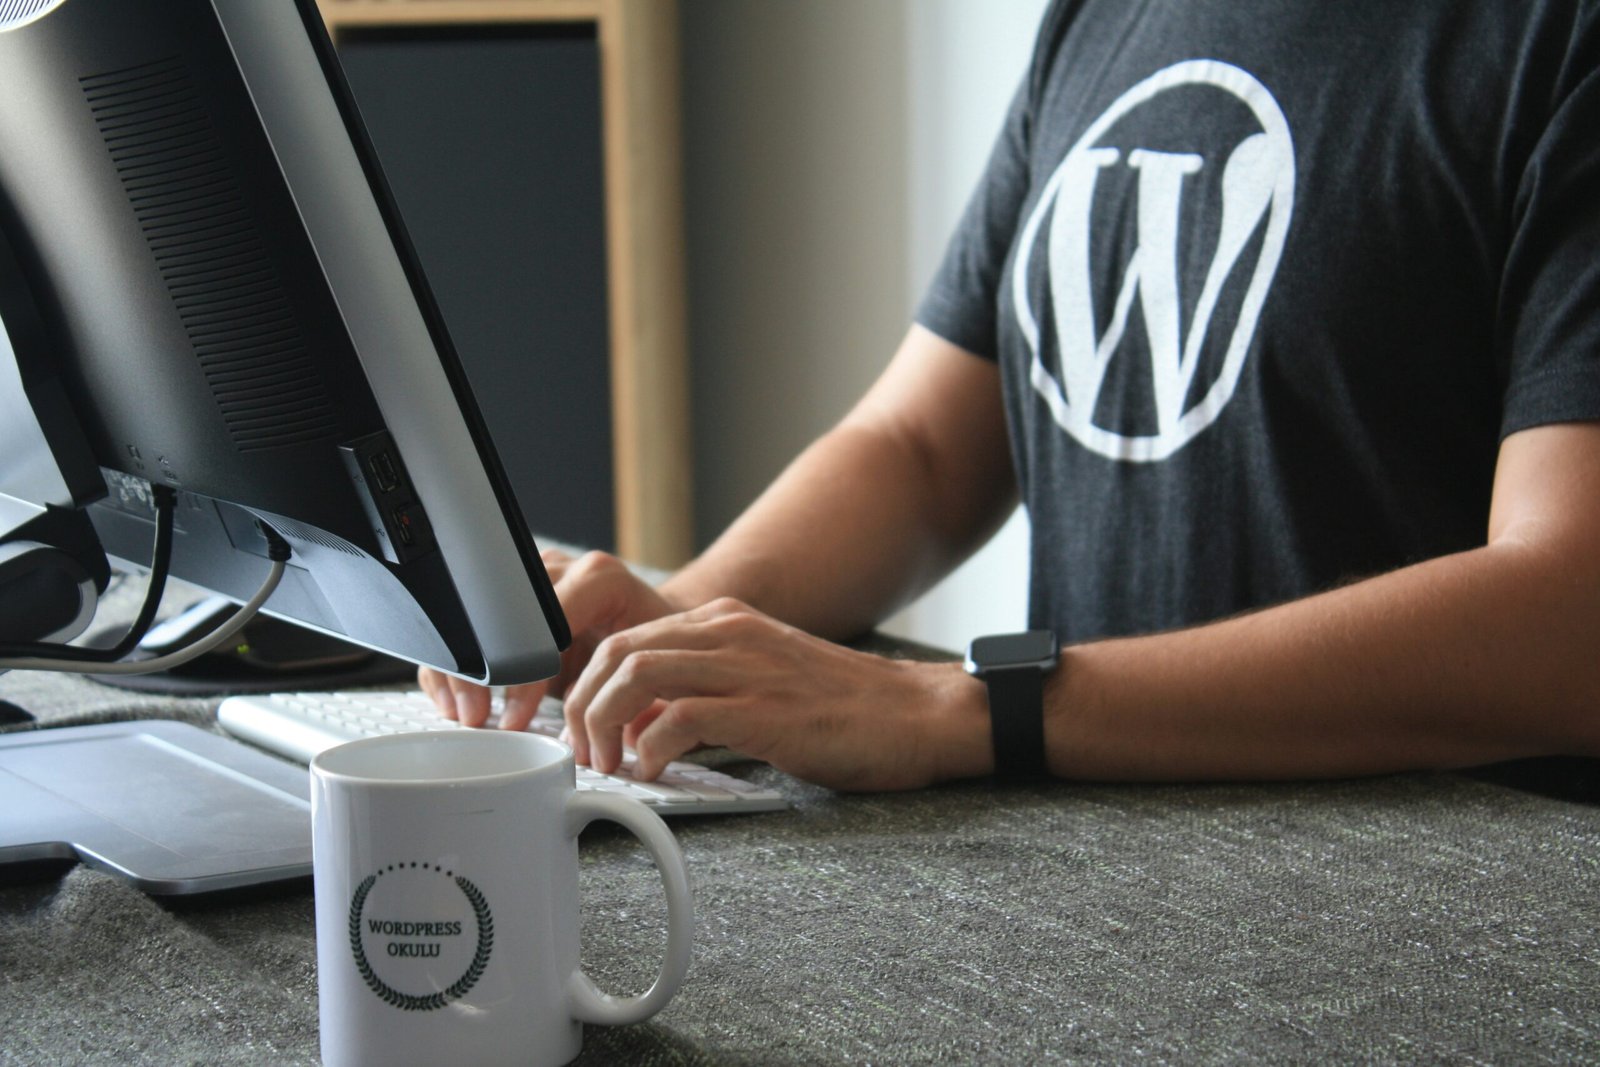 Grow your Business with WordPress: A Simple Guide